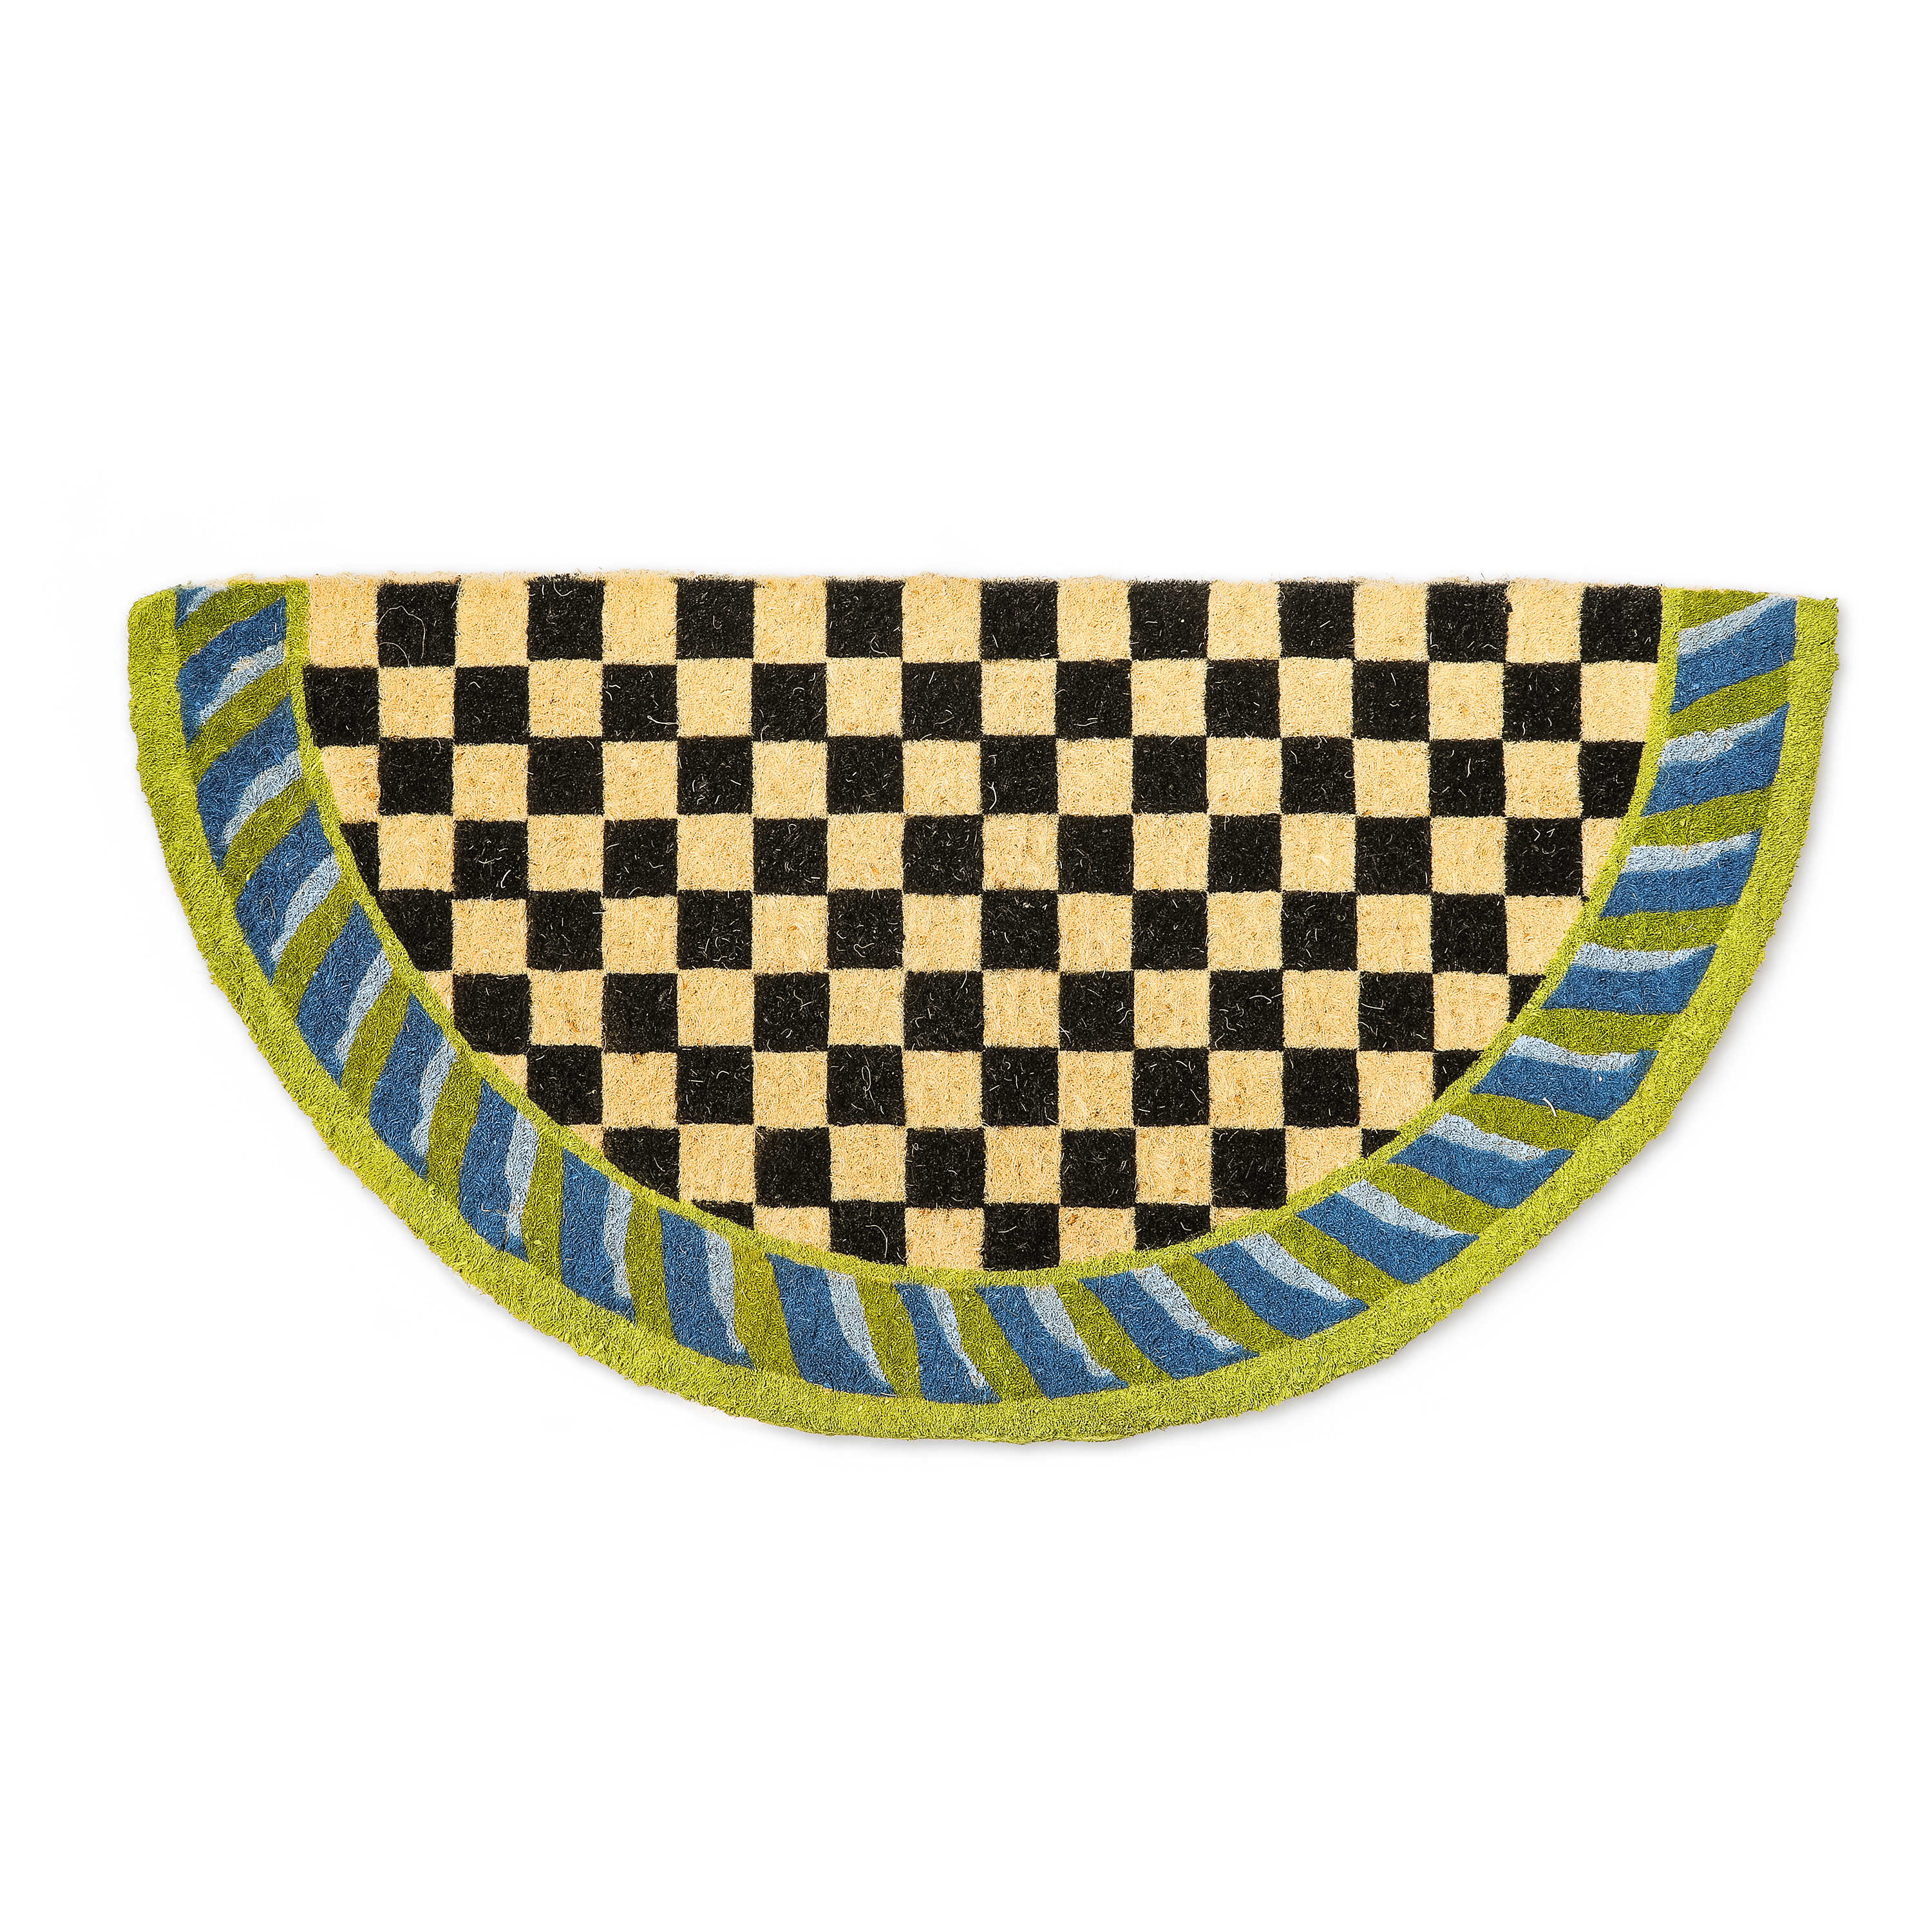 Half Round Courtly Check Entrance Mat - Blue and Green mackenzie-childs Panama 0